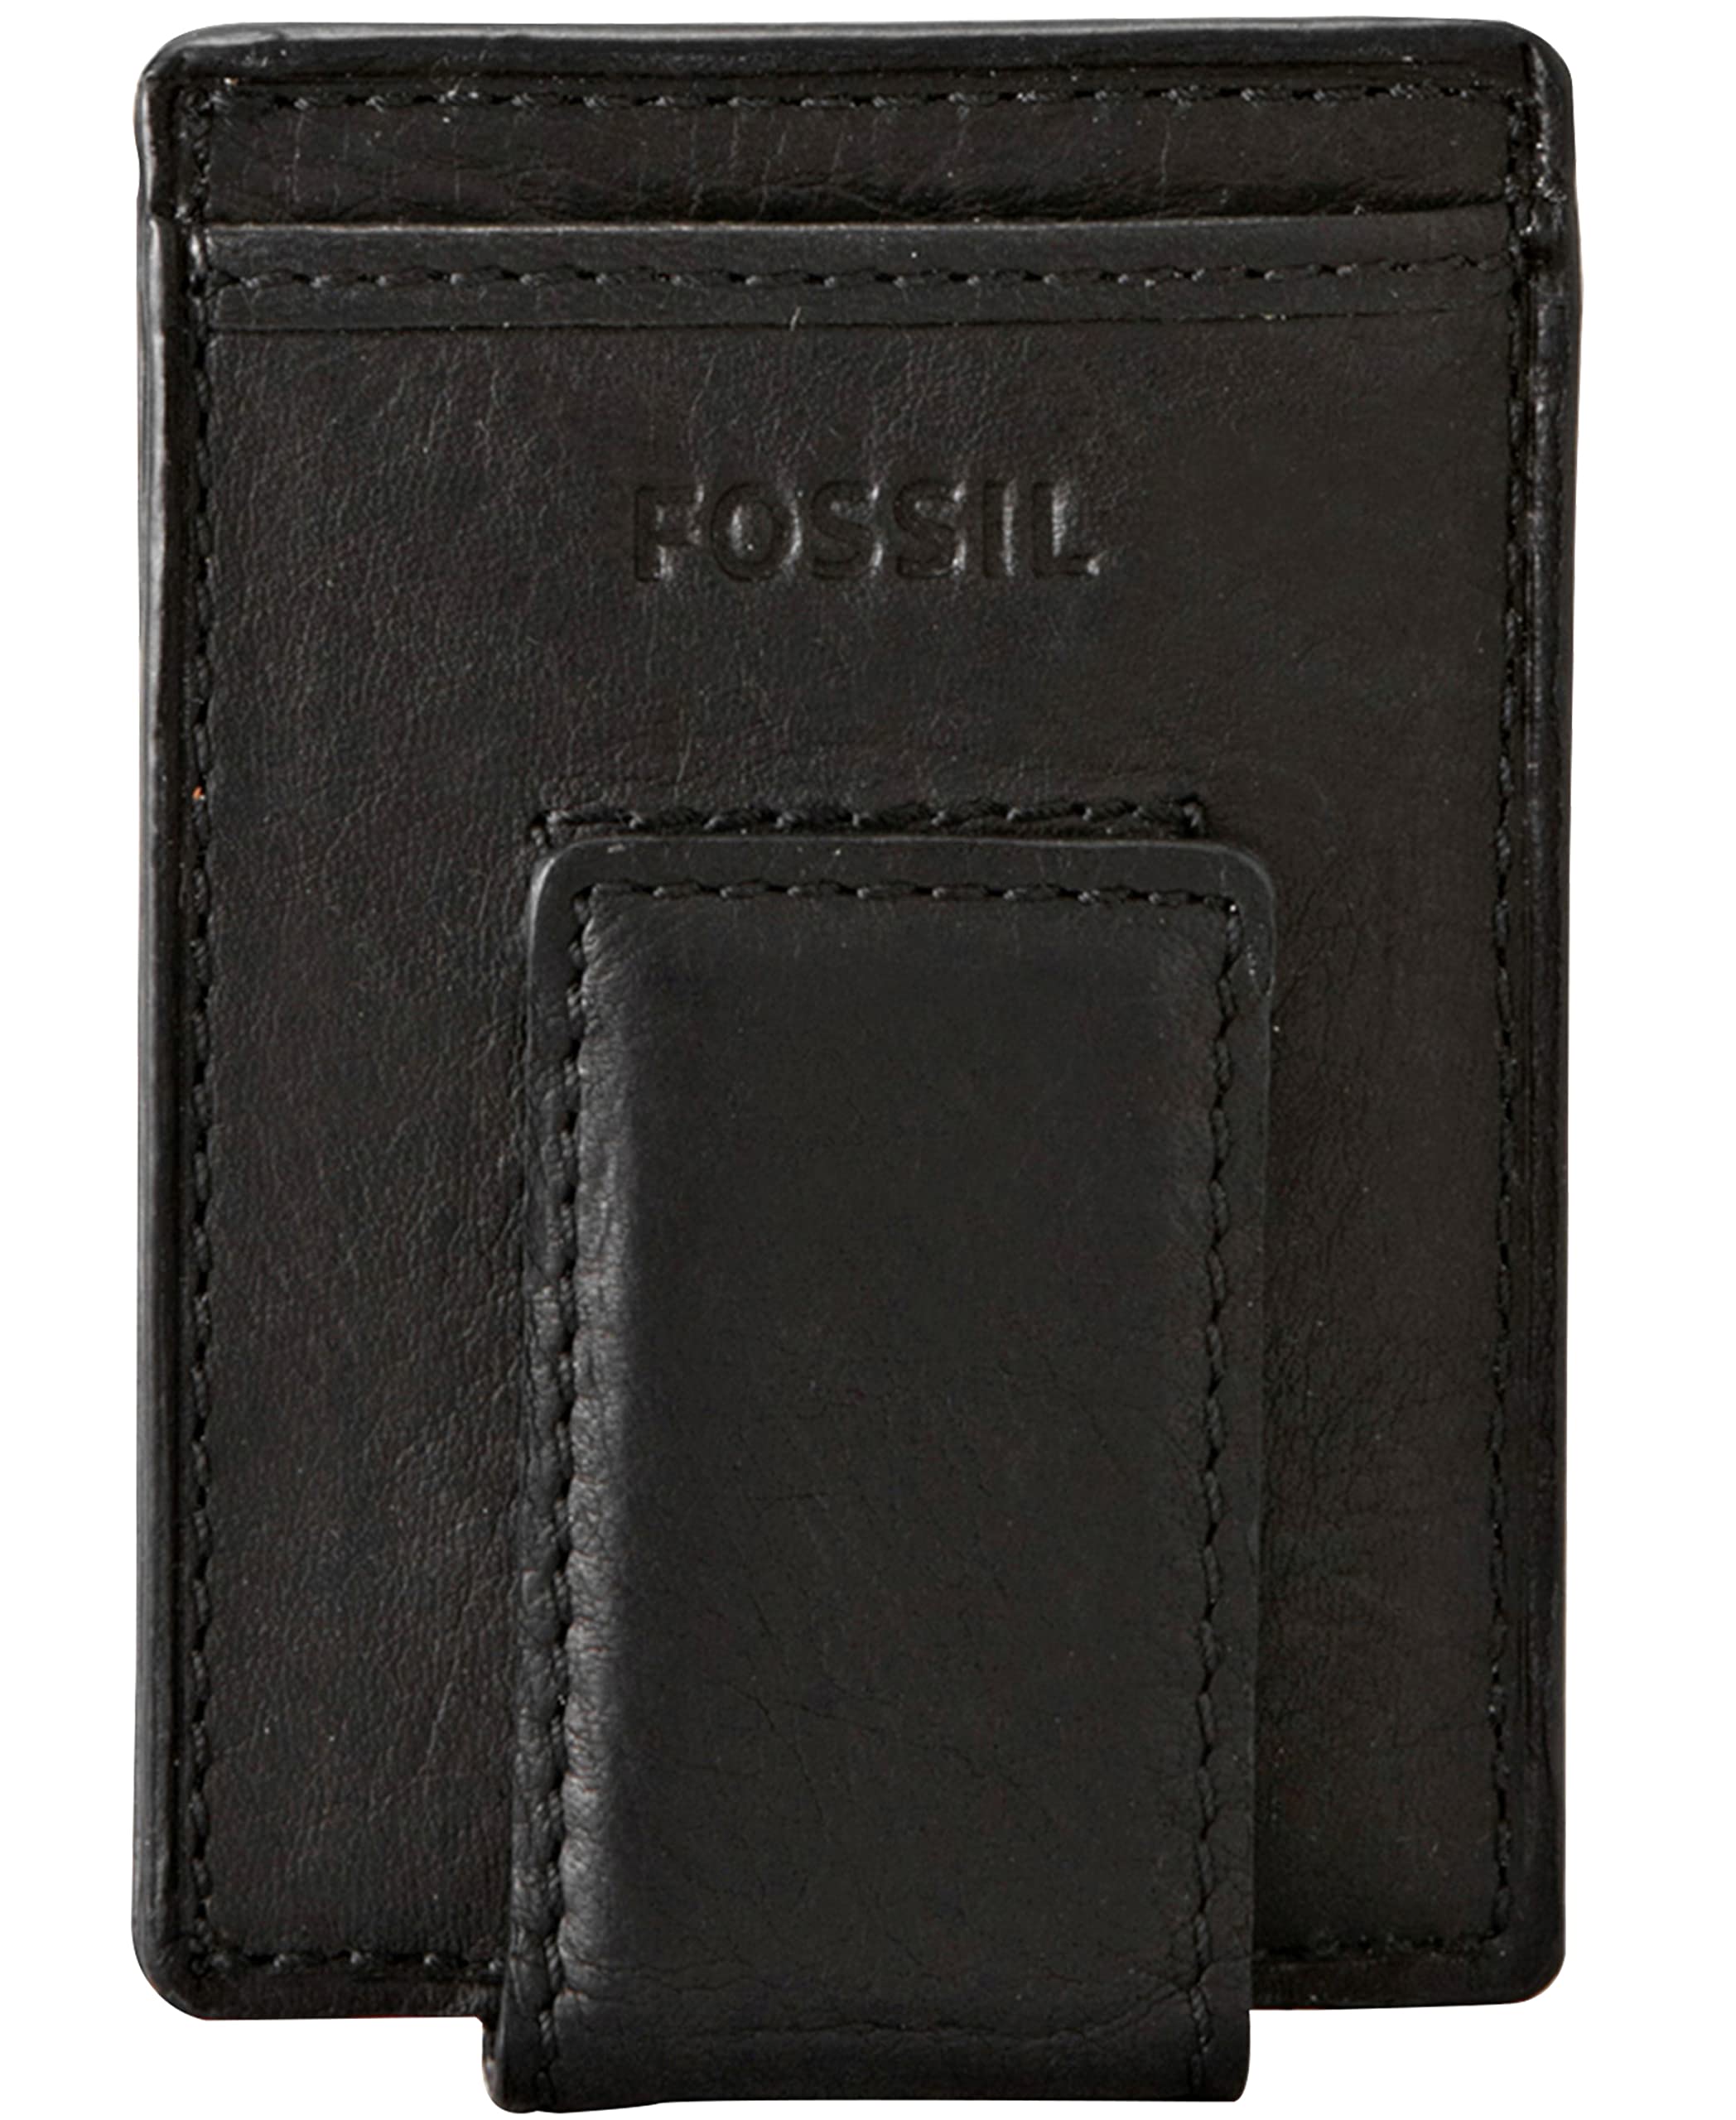 Fossil Men's Andrew Leather Magnetic Card Case with Money Clip Wallet